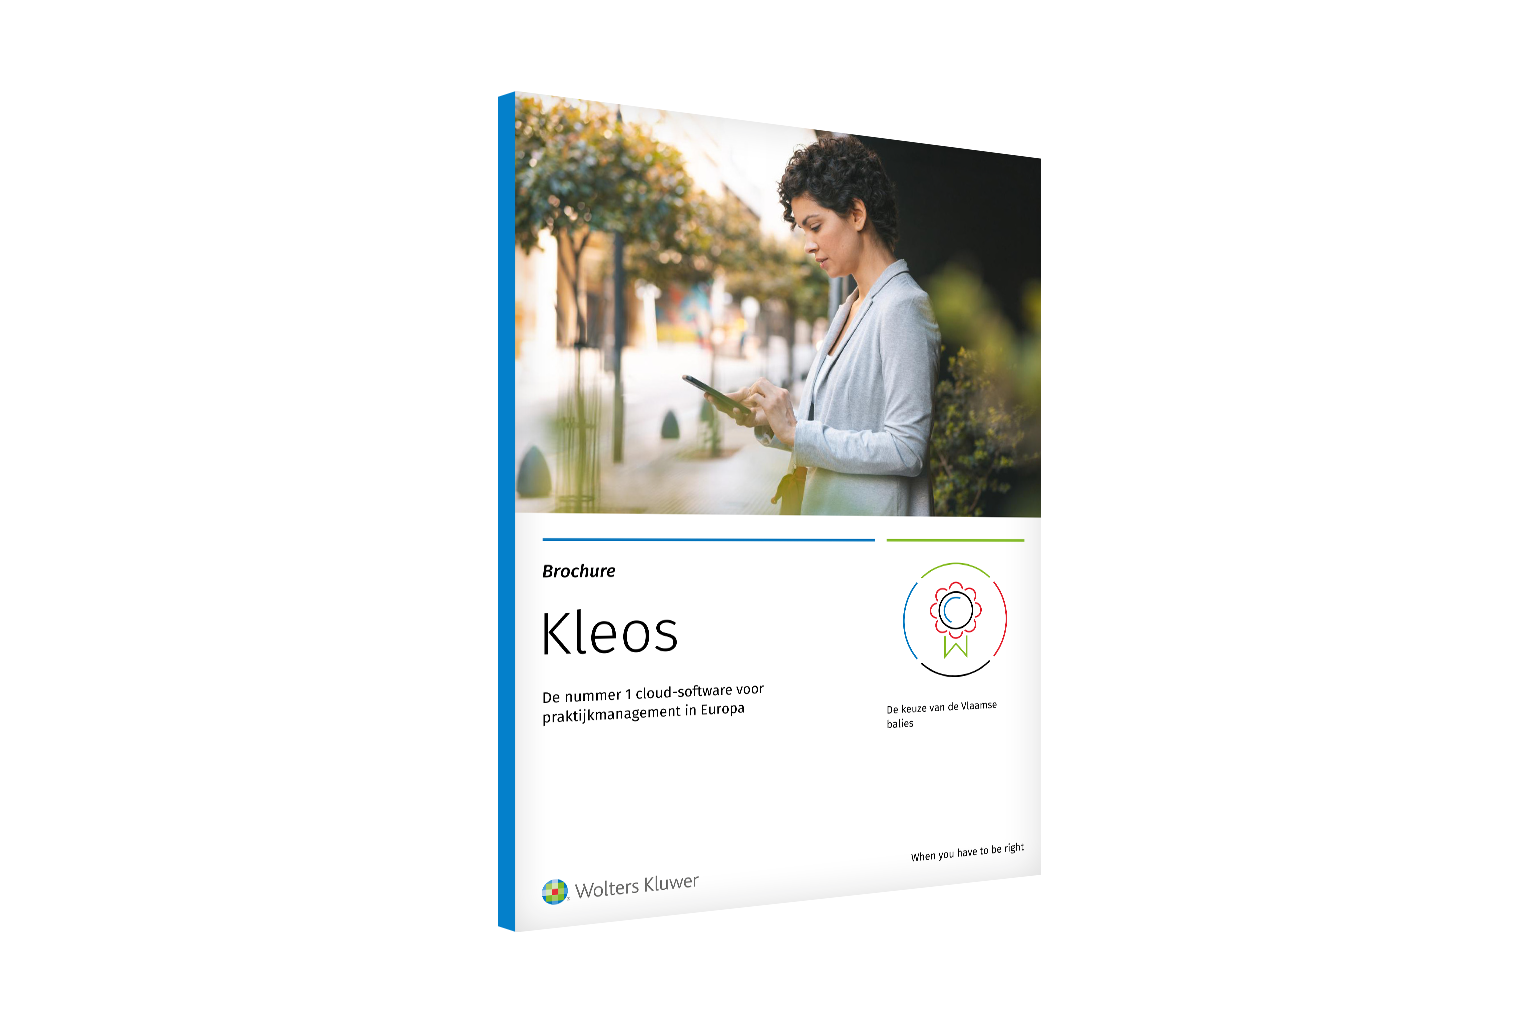 WK_Kleos_Brochure_BE-NL_cover_1536x1024.png